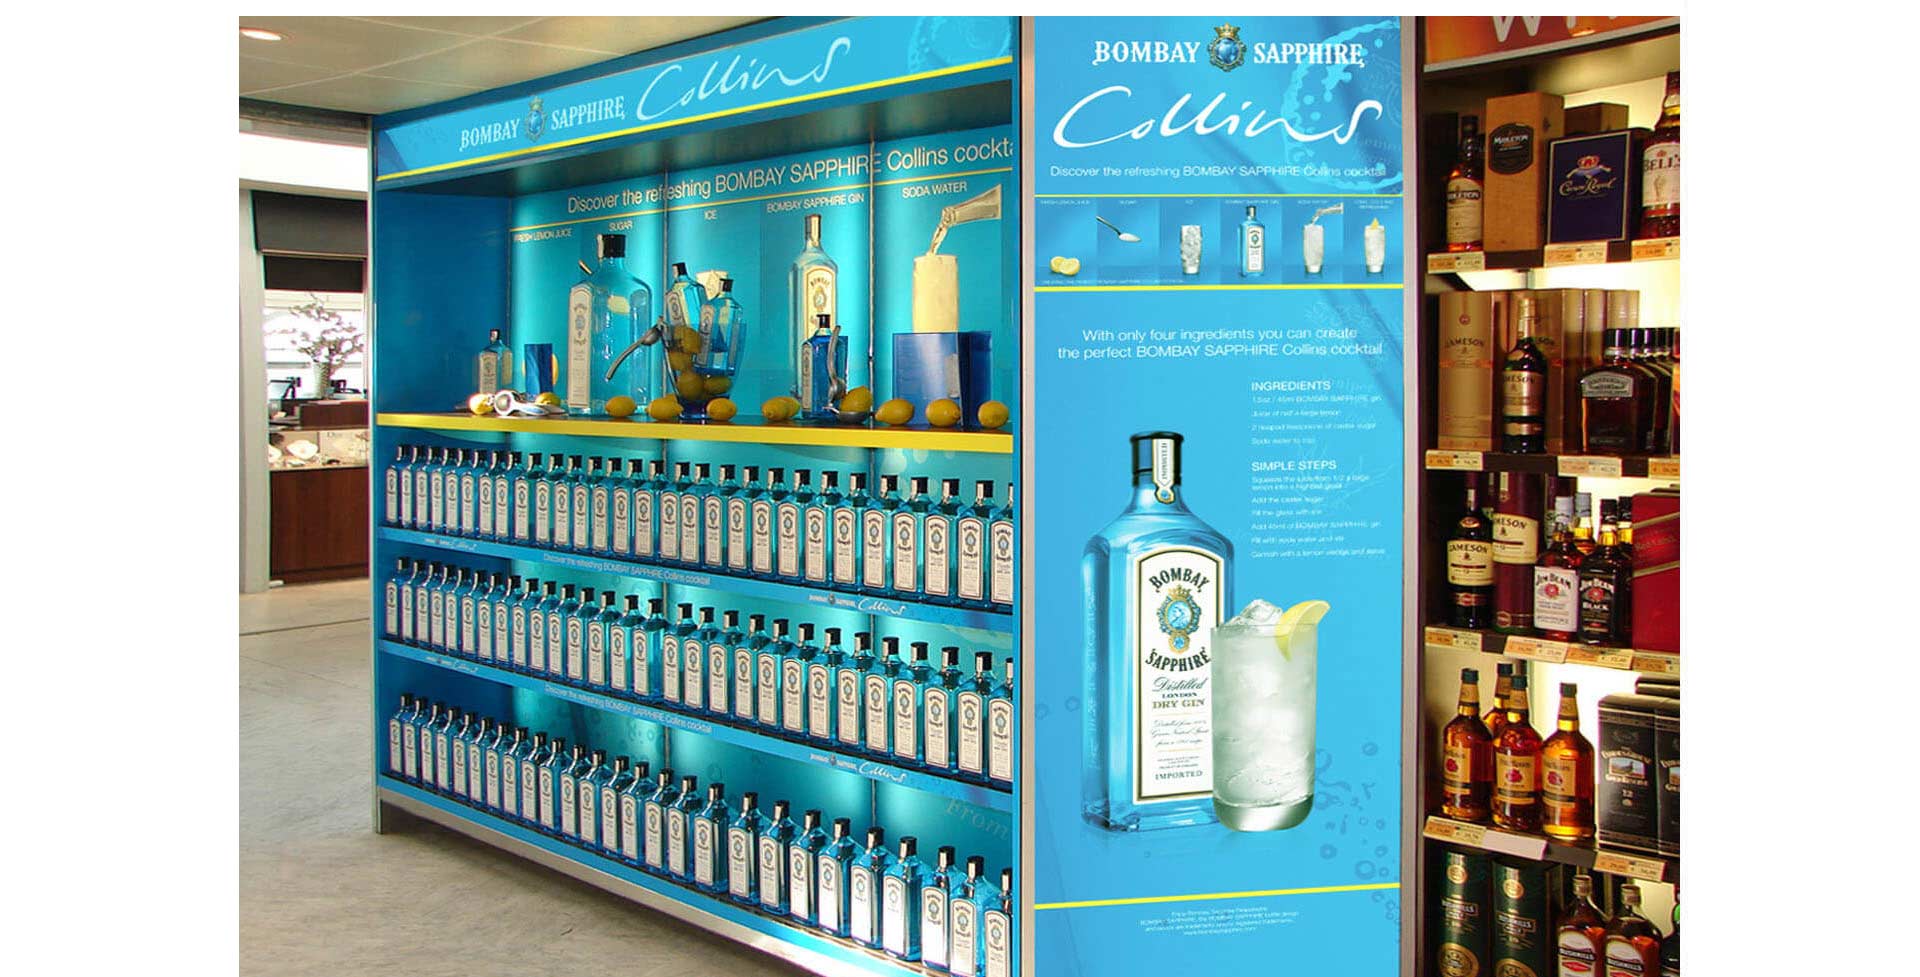 Bombay Sapphire Collins Spirits industry promotion campaigns travel retail design and branding, airport Heathrow Terminal 4, London